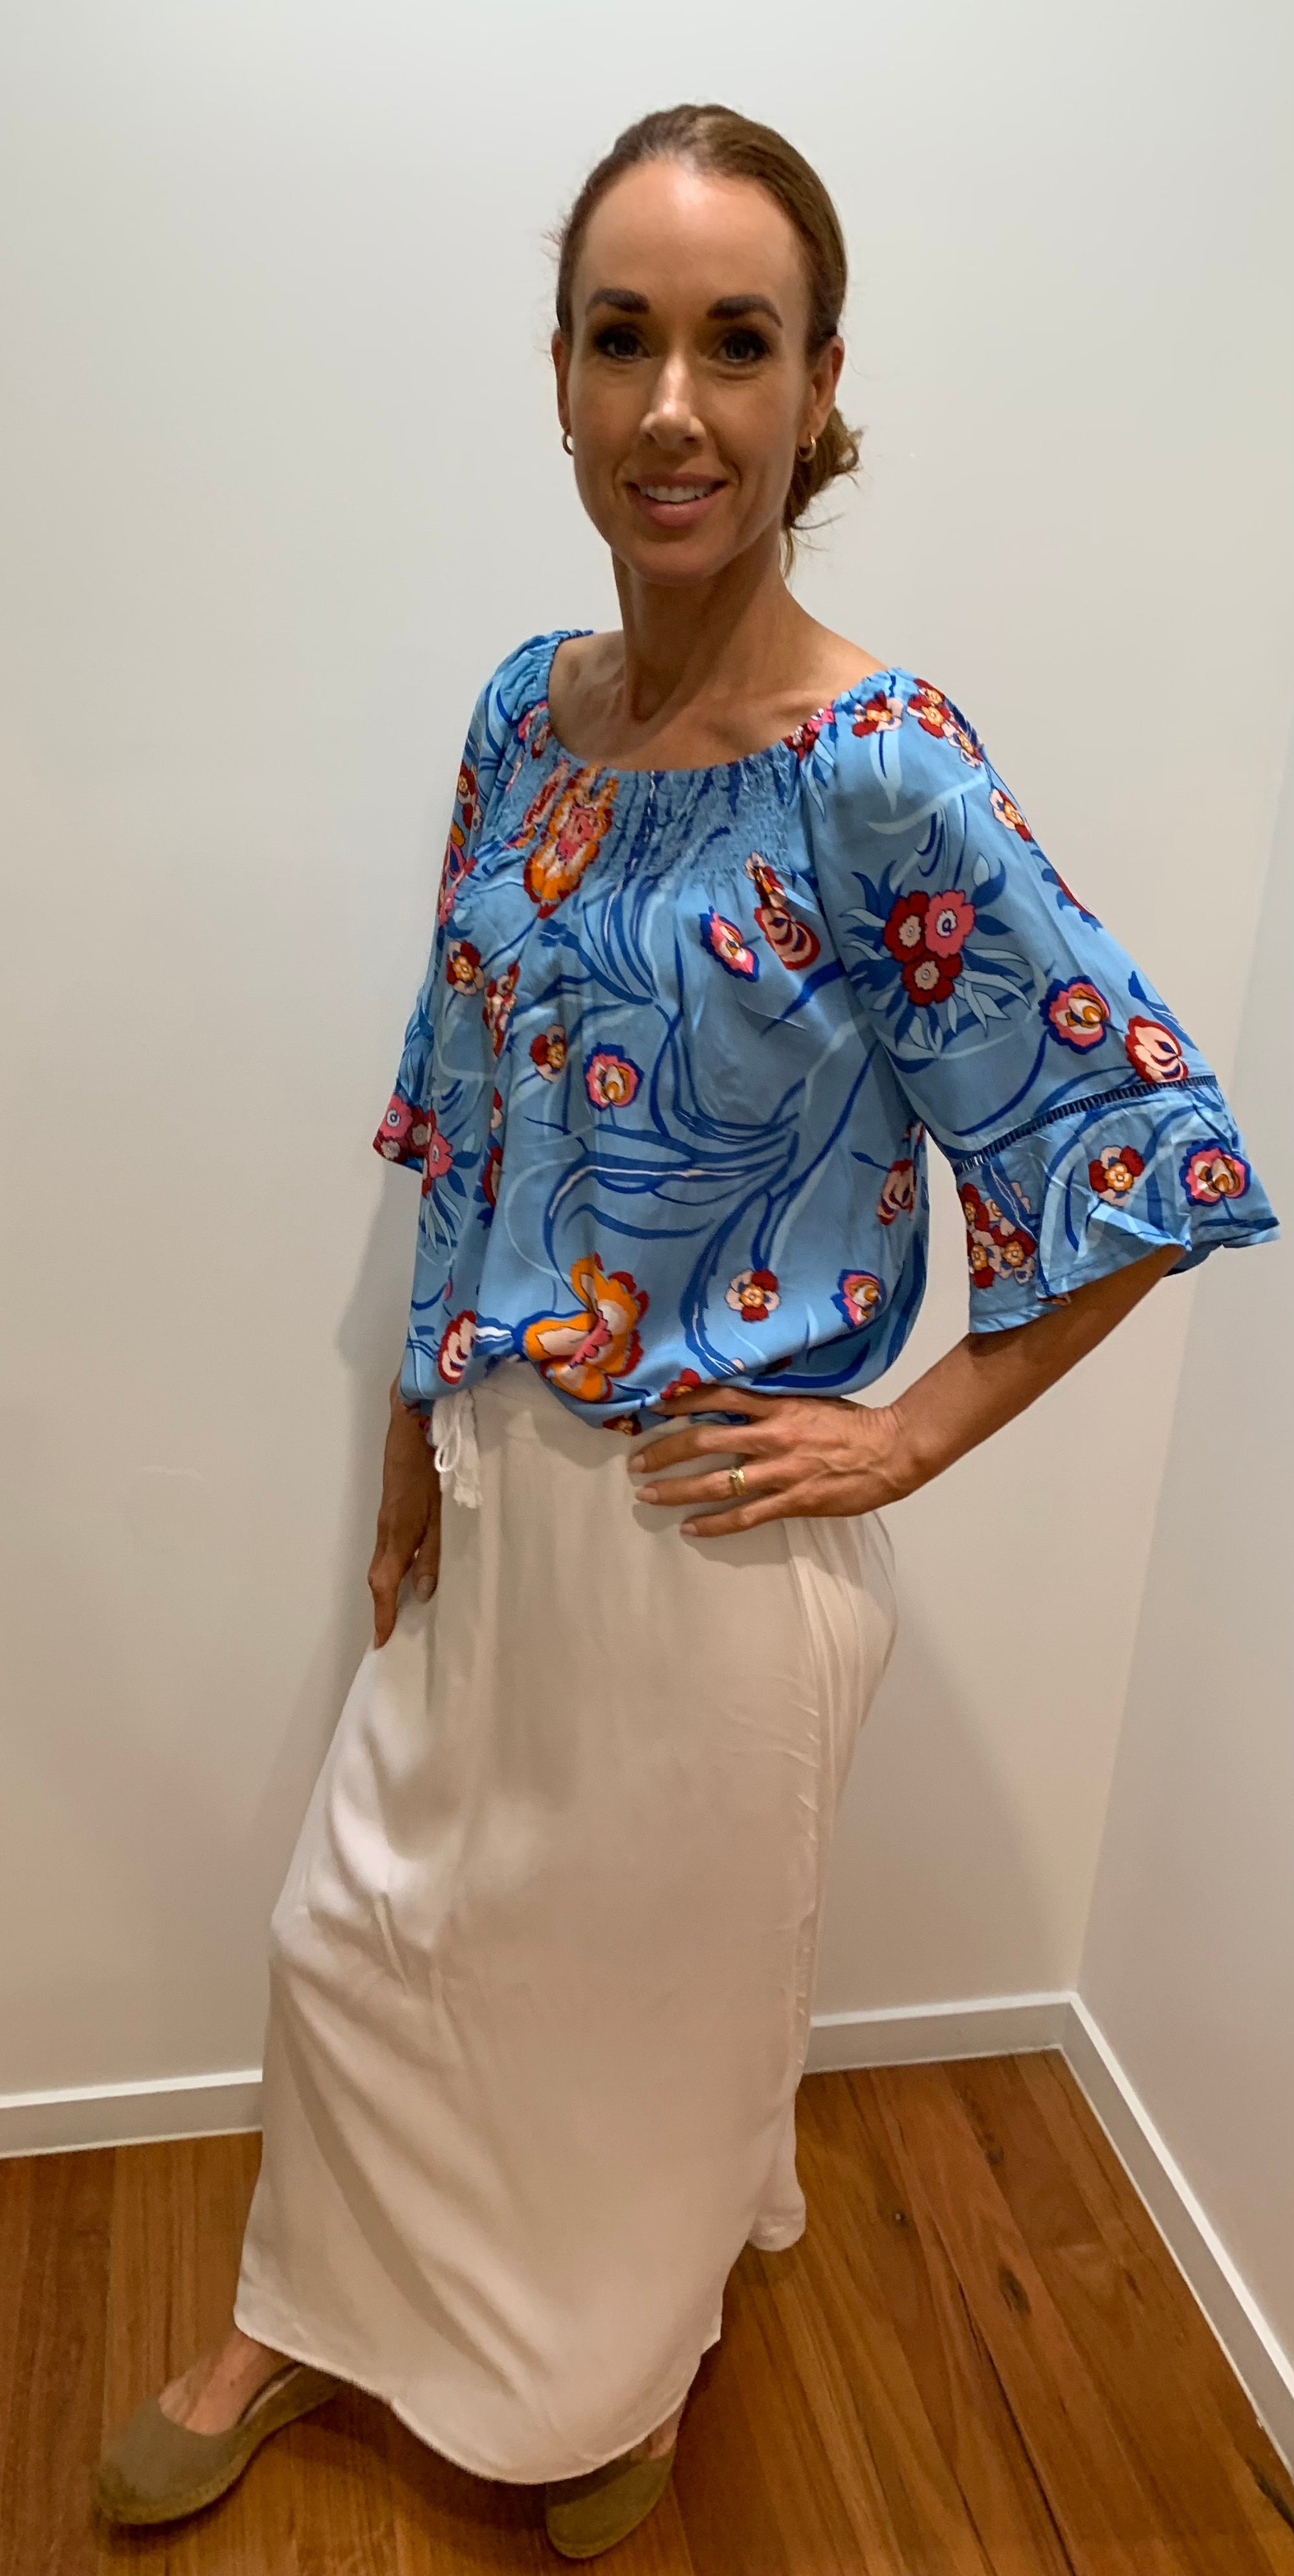 Off the Shoulder Top in Light Blue with Orange Floral Print 3/4 Long Sleeves - Willow Tree